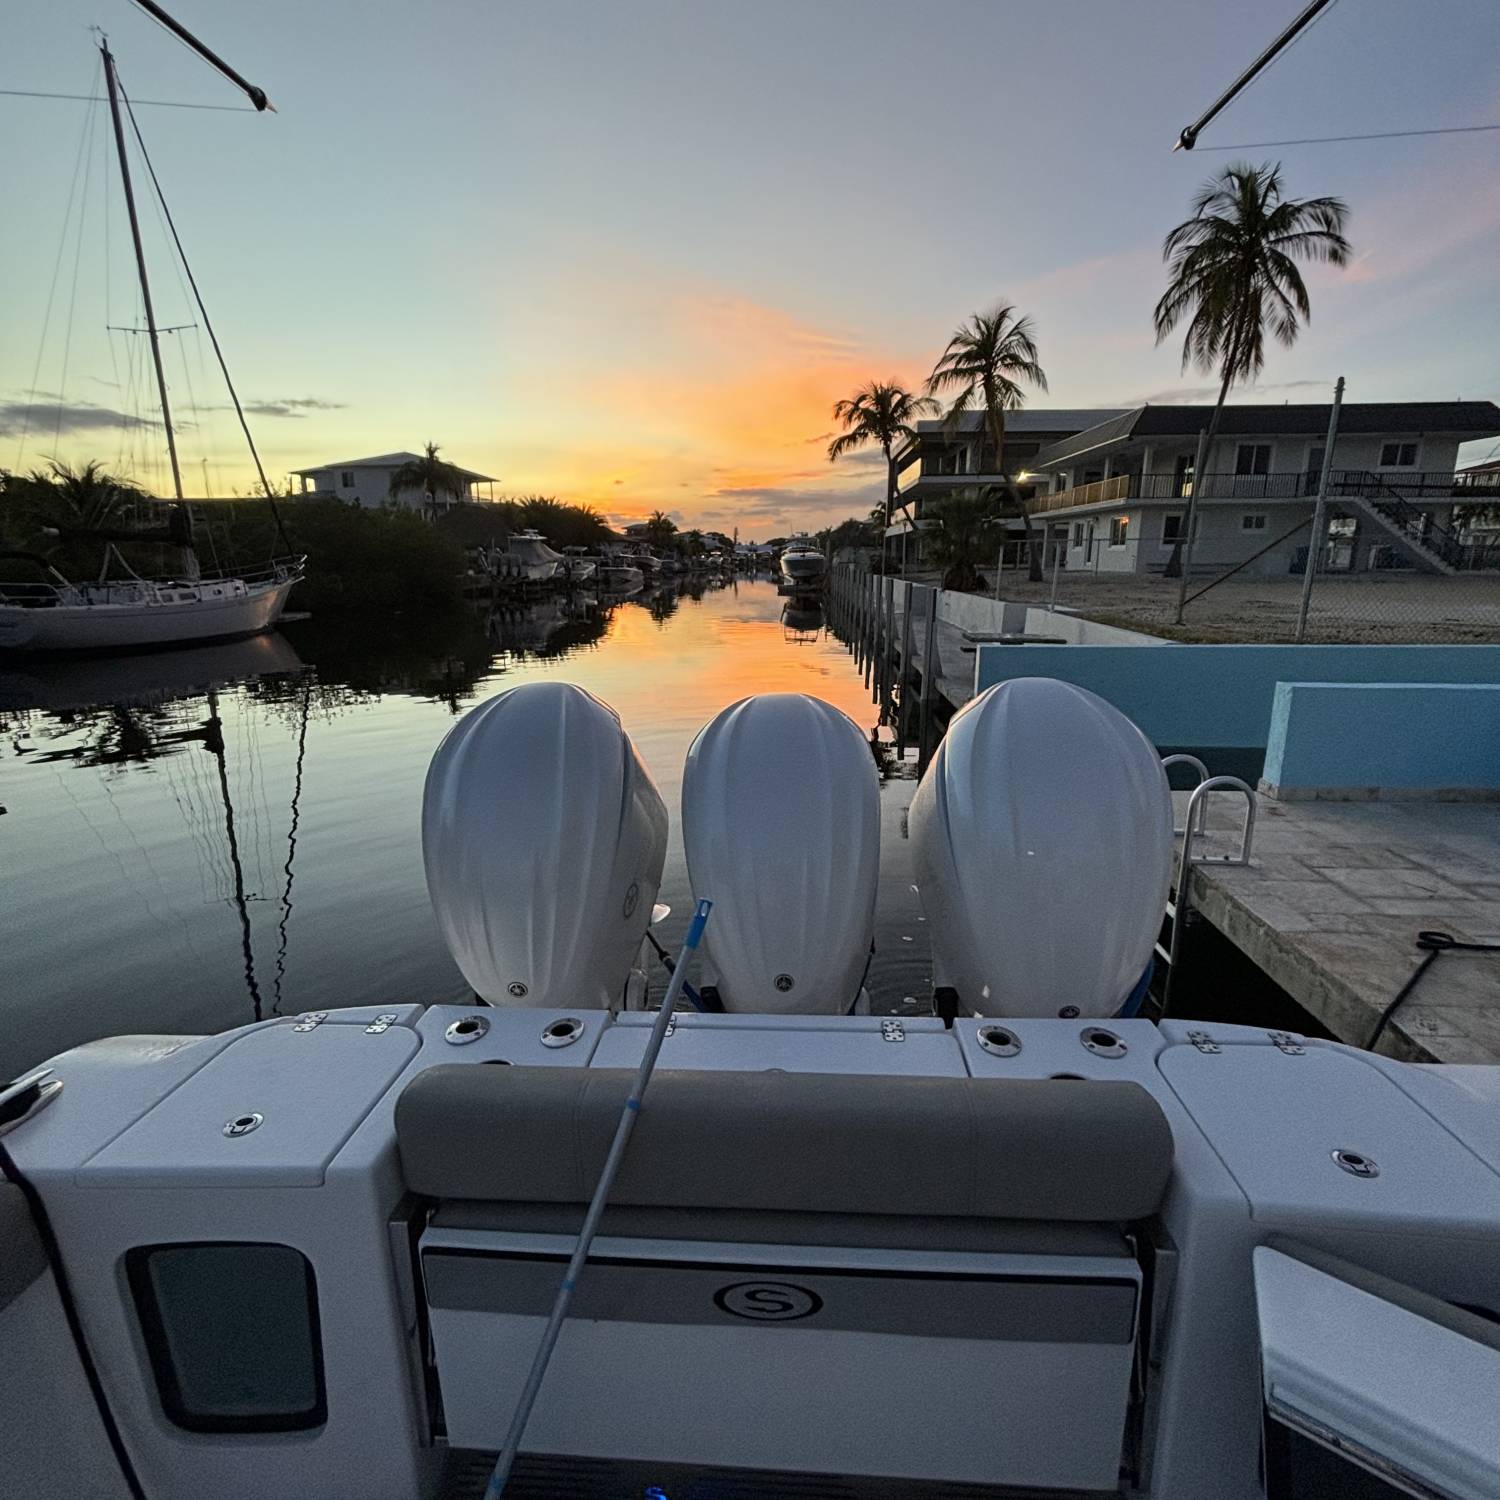 After a long day off fishing and at the sandbar there was a beautiful sunset while cleaning the boat in...